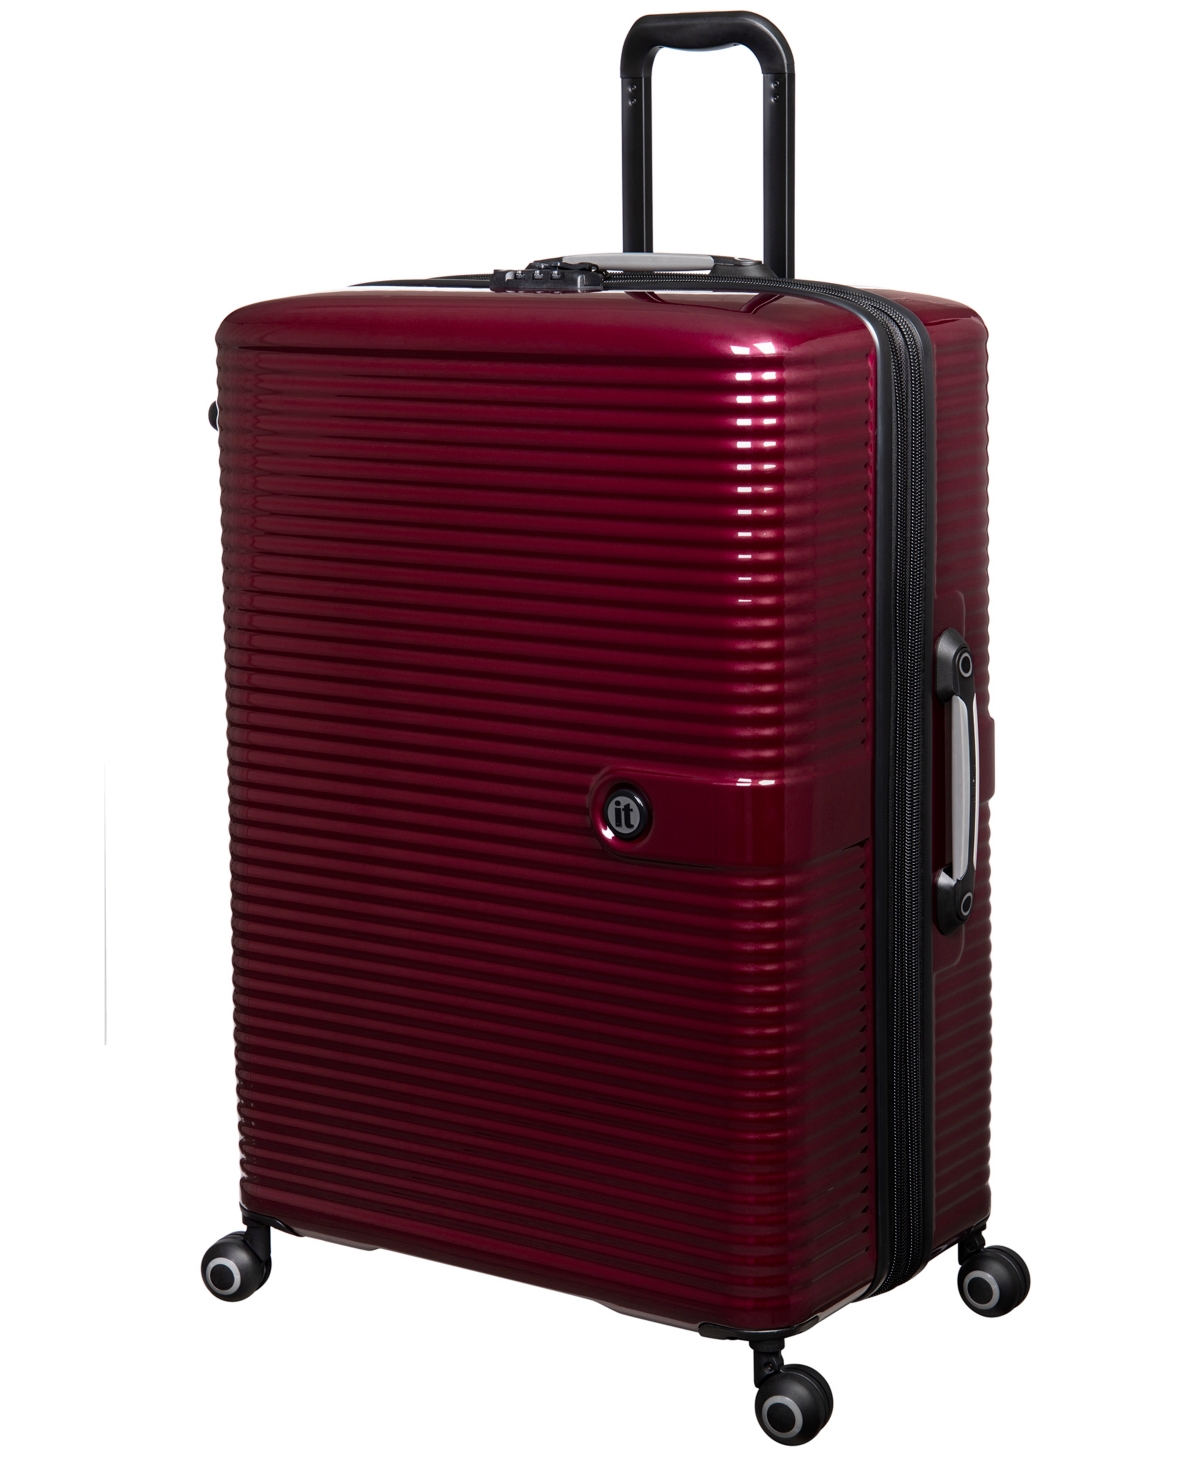 Helixian 19" Hardside Carry-On 8-Wheel Expandable Spinner - Wine Red